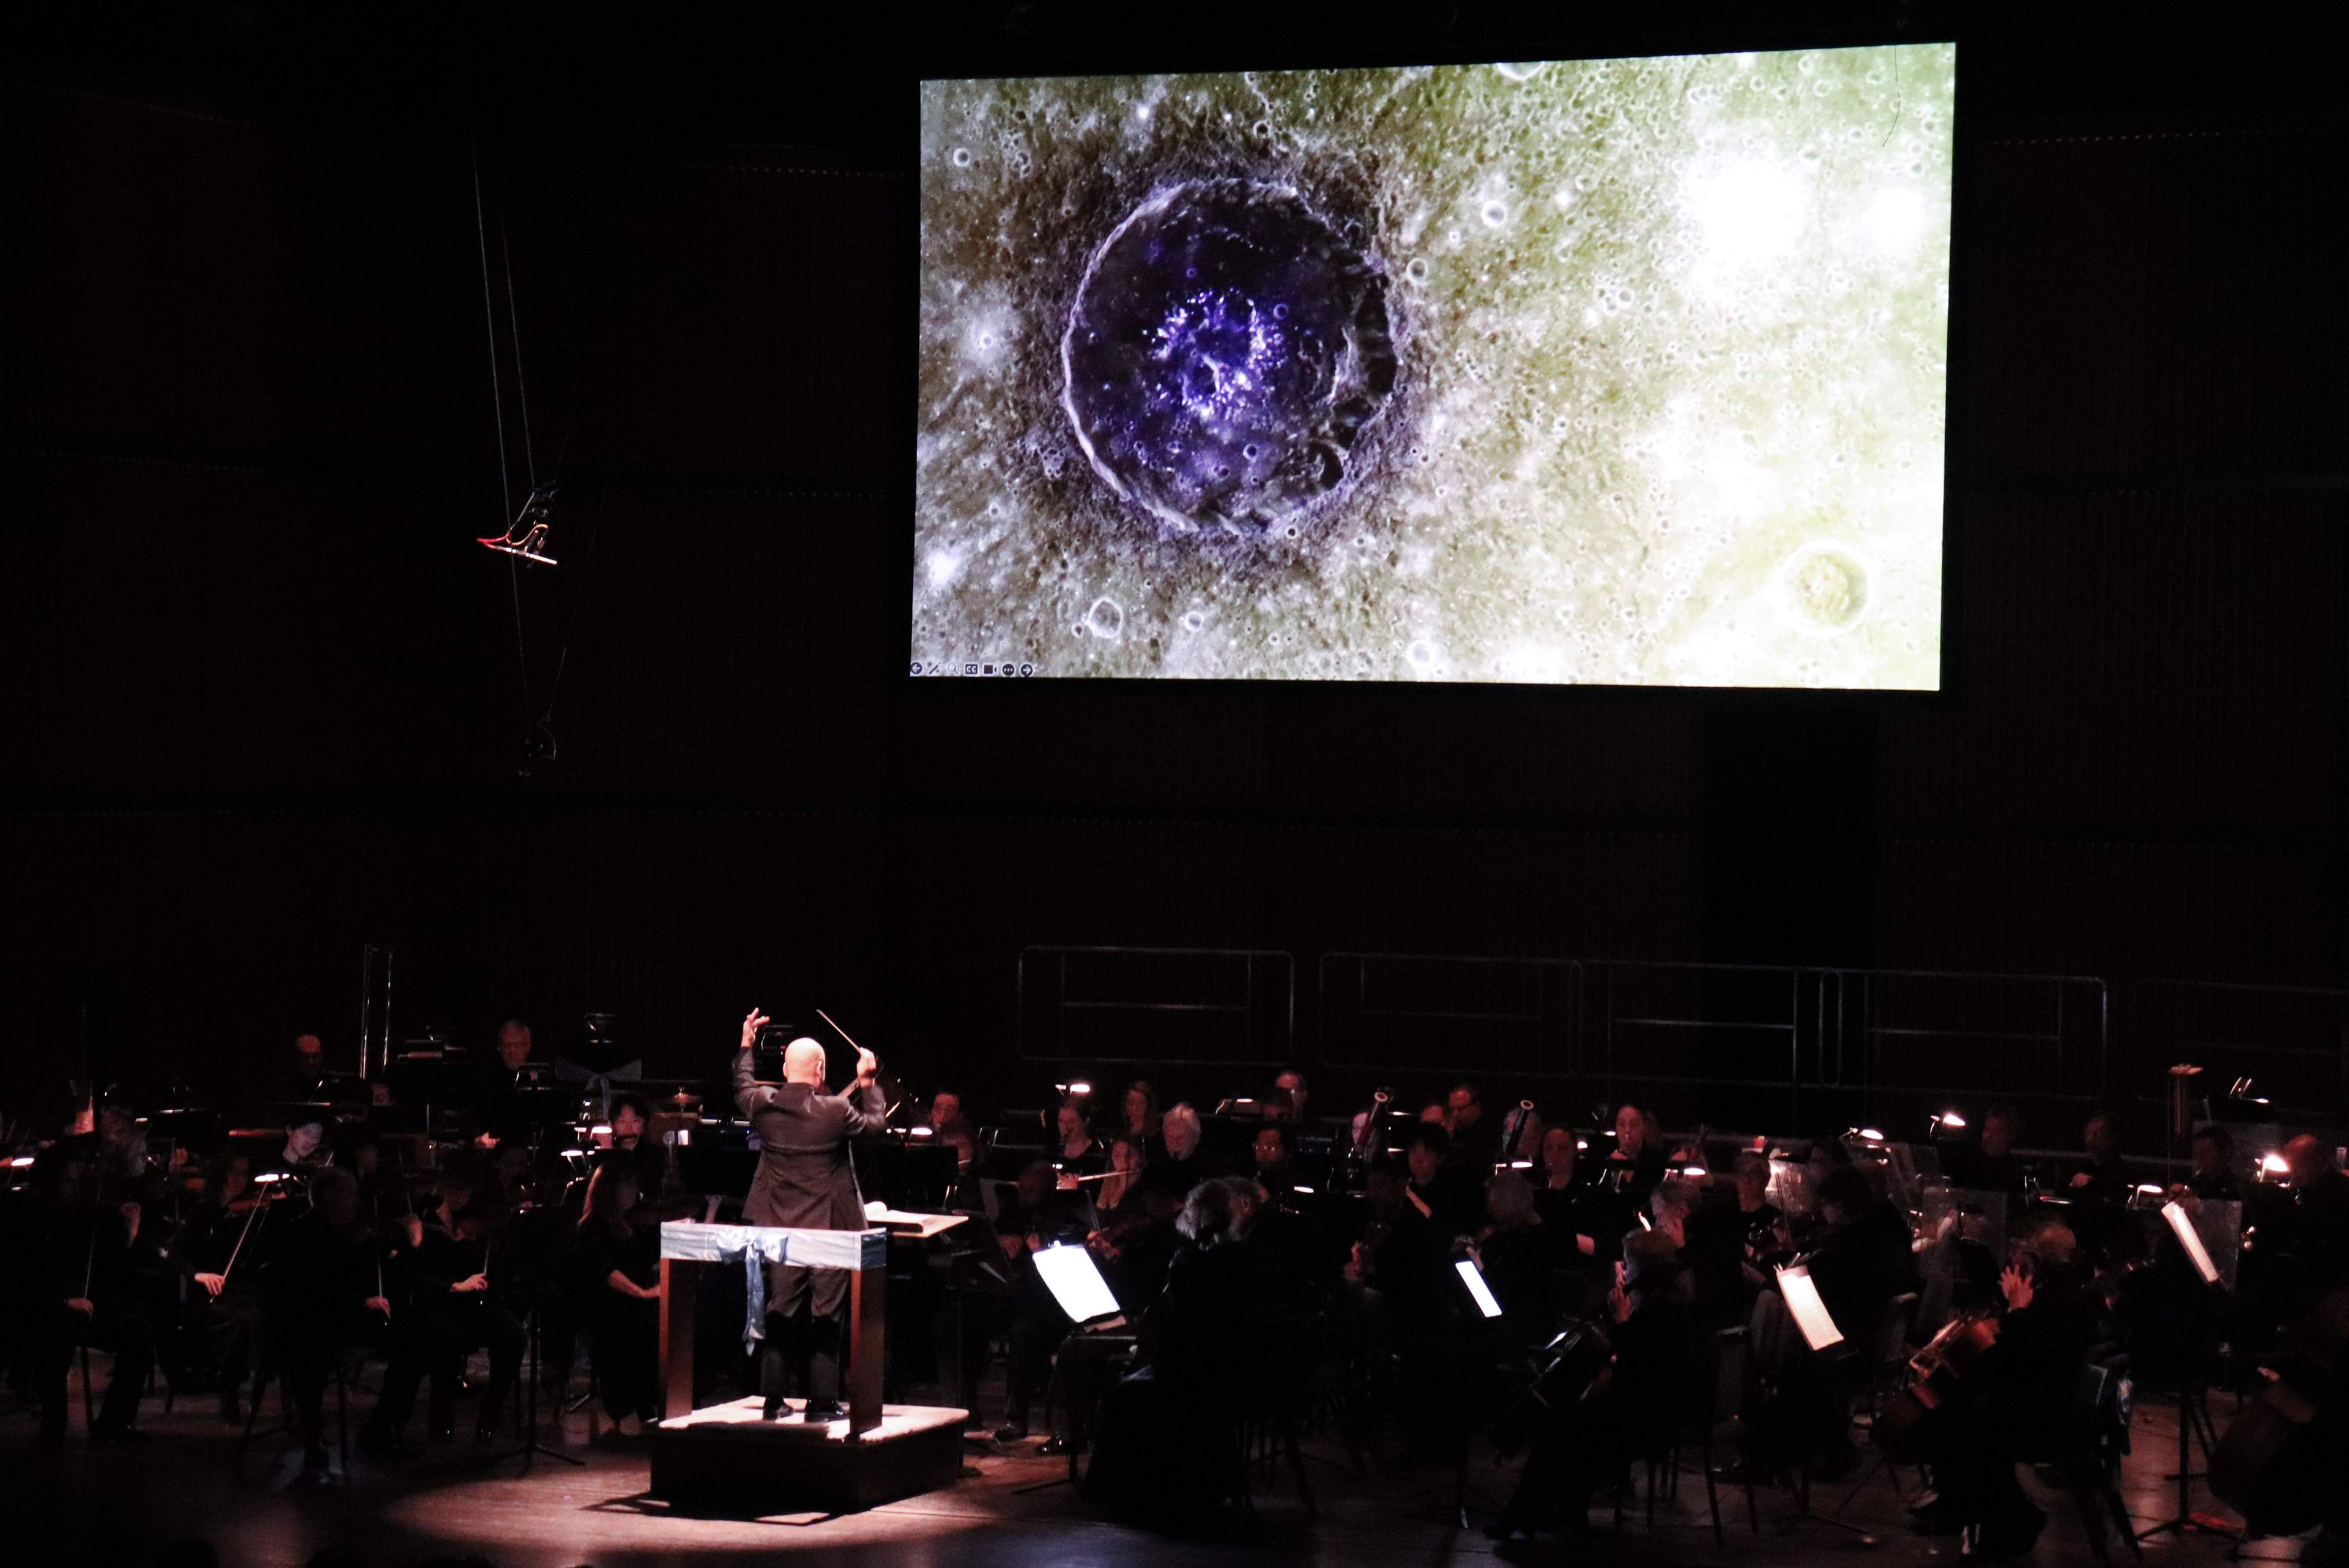 Symphony orchestra performing on a dimly lit stage with planets projected on screen